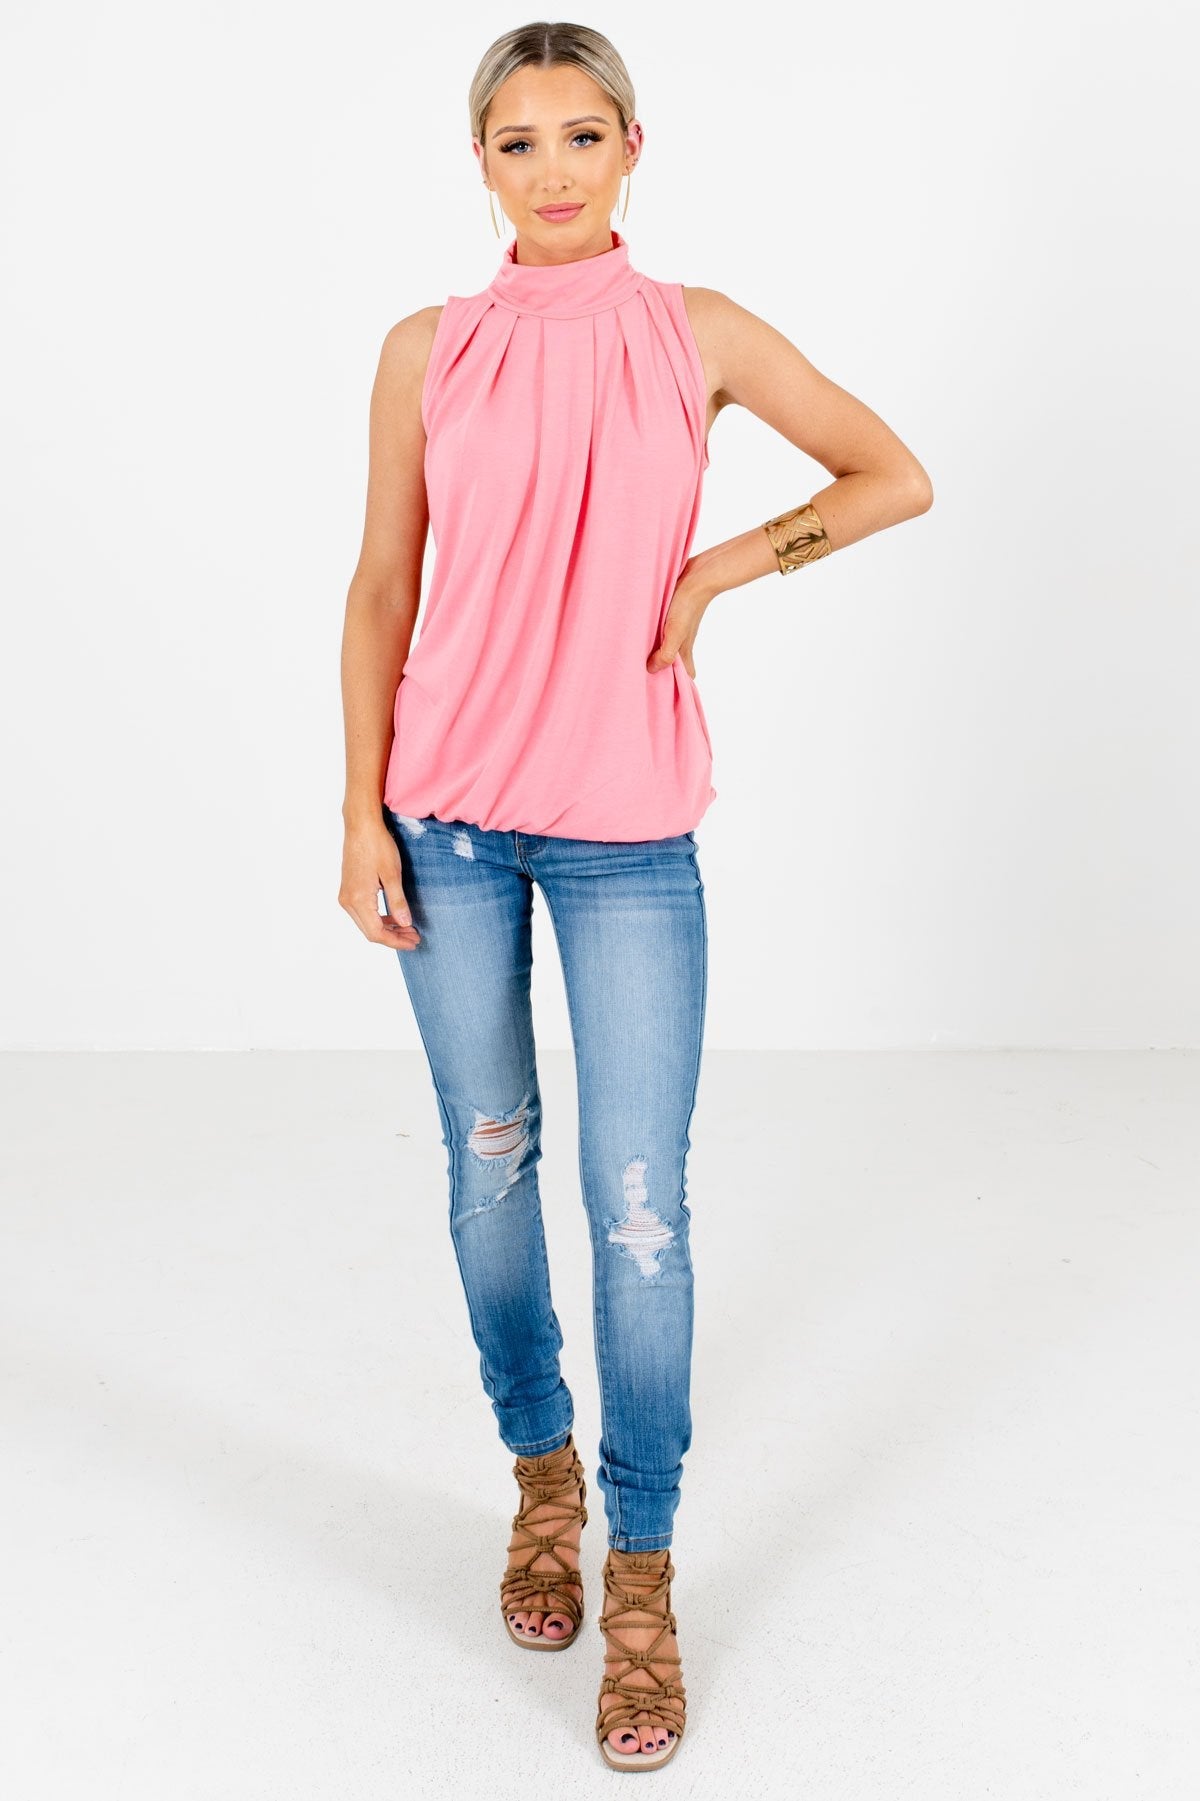 Women���s Pink Spring and Summertime Boutique Clothing